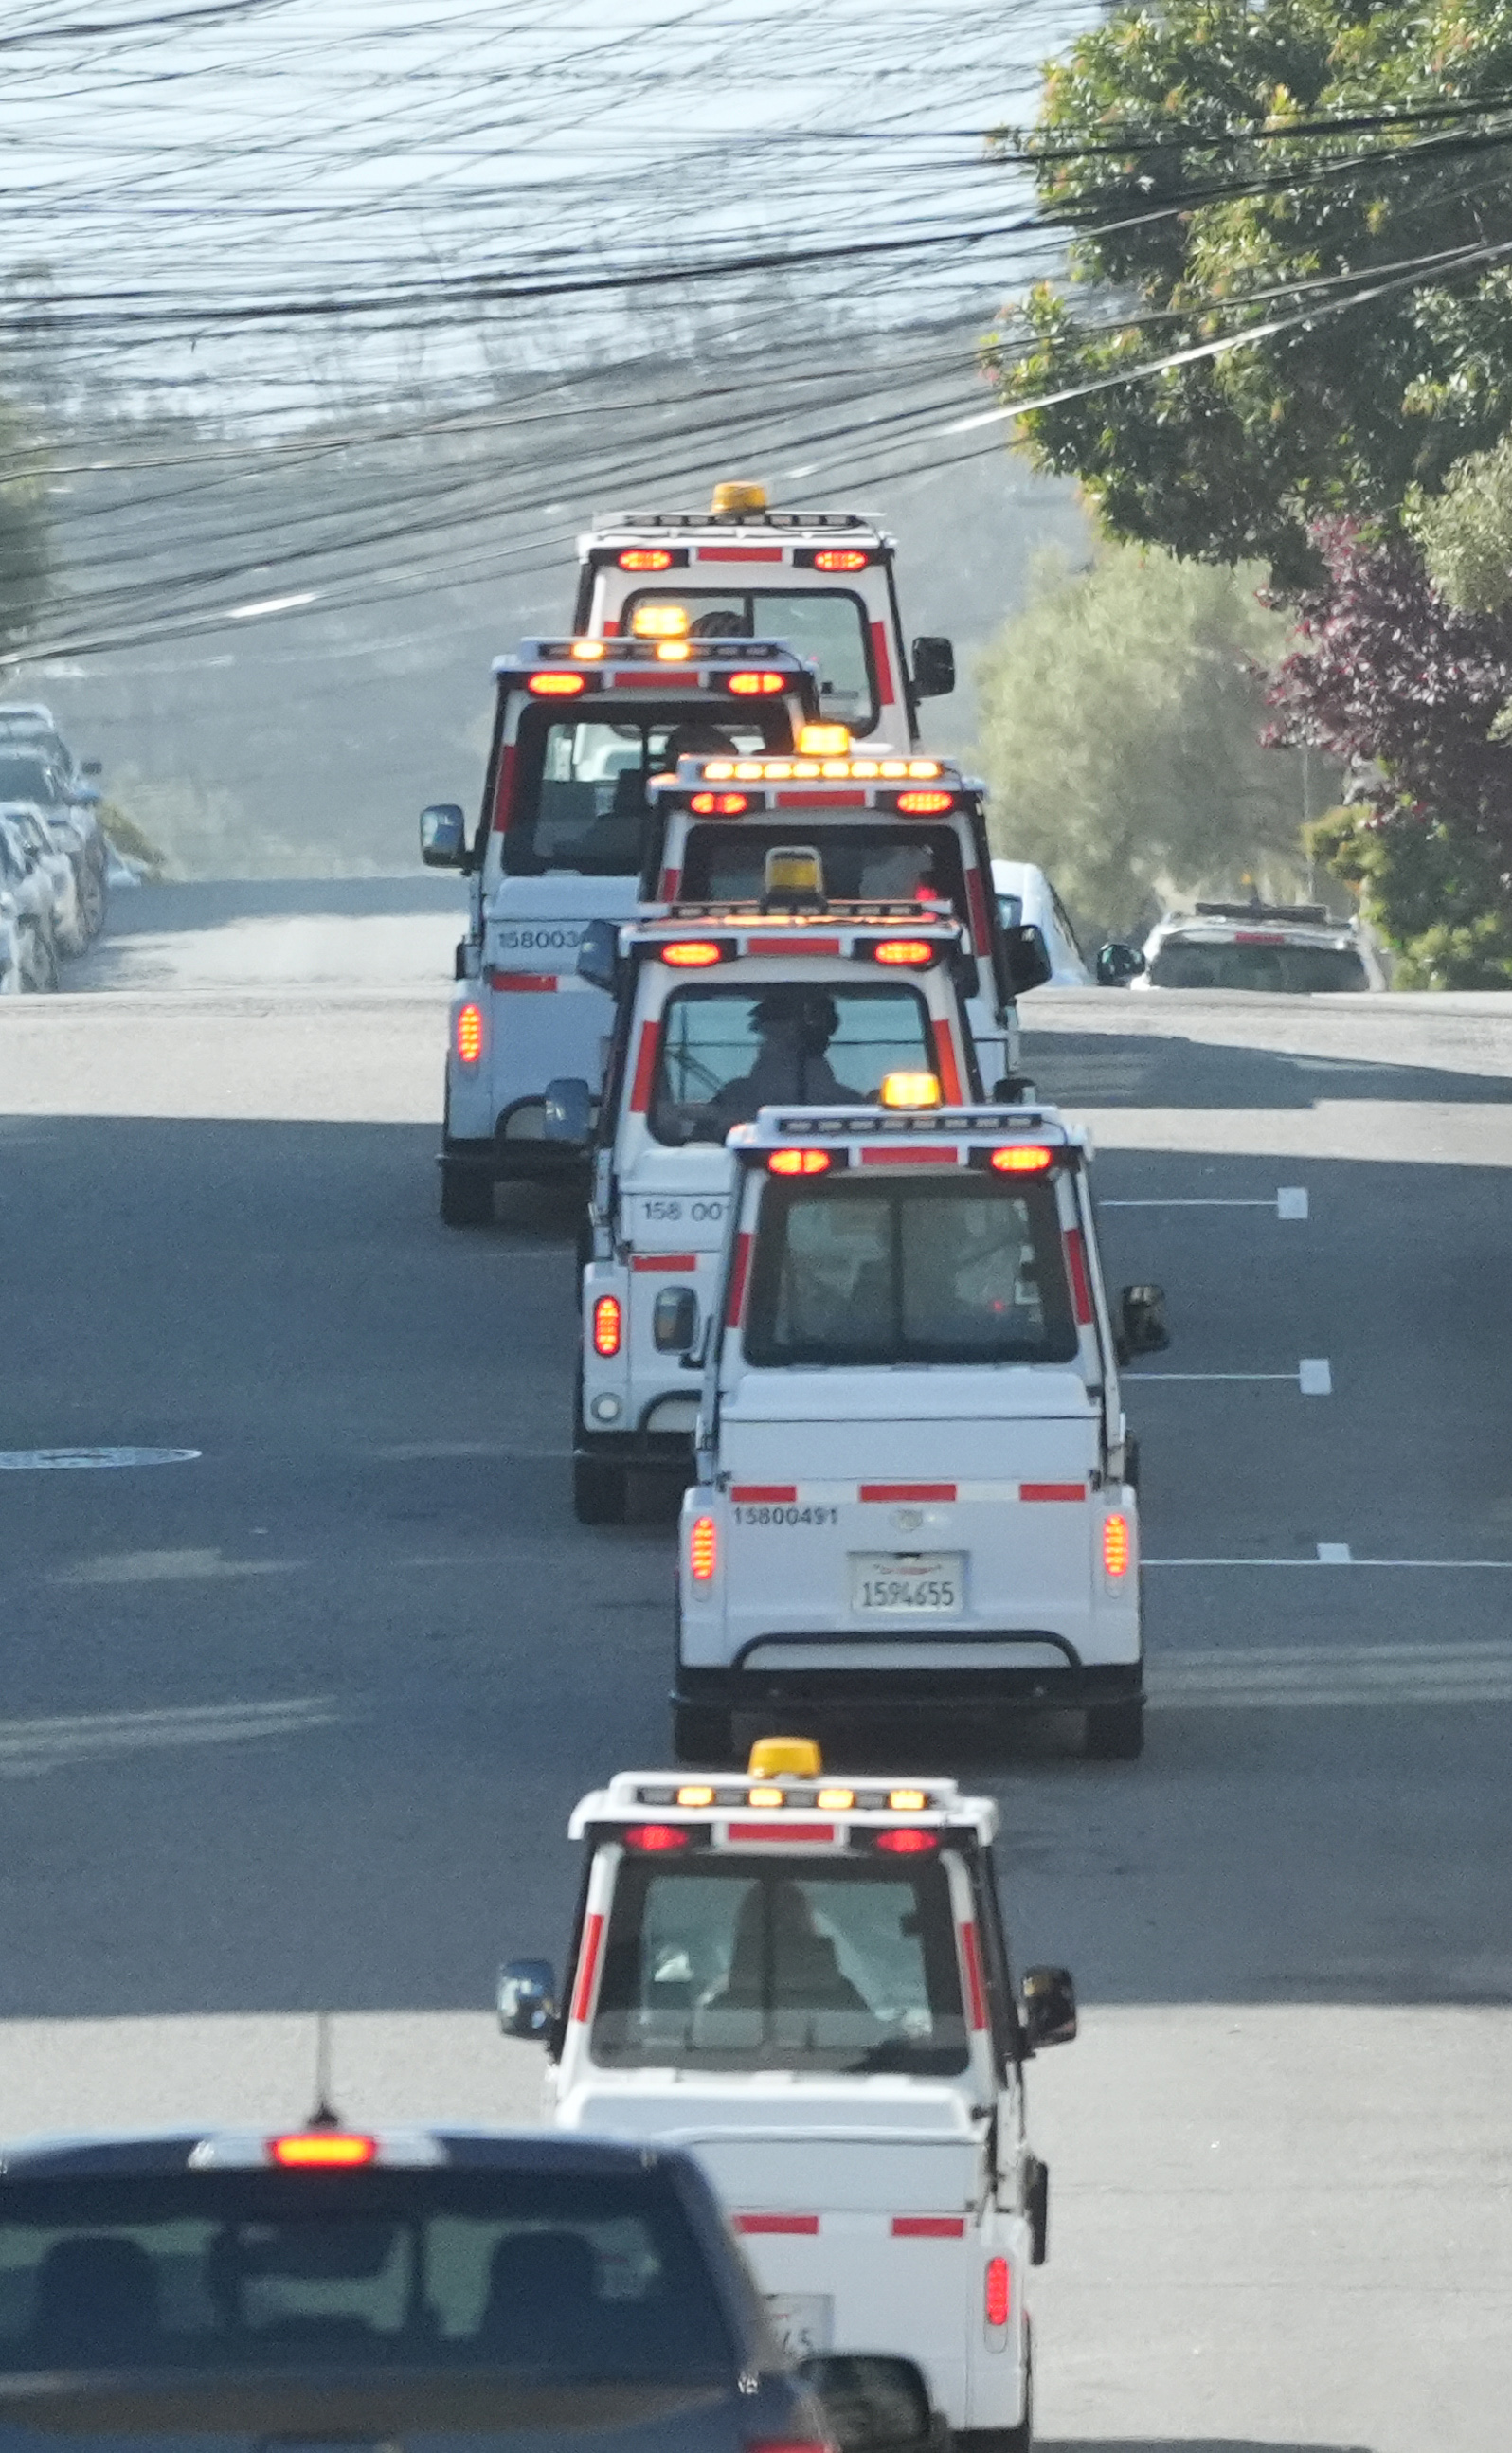 A line of parking control vehicles with flashing lights on a road.